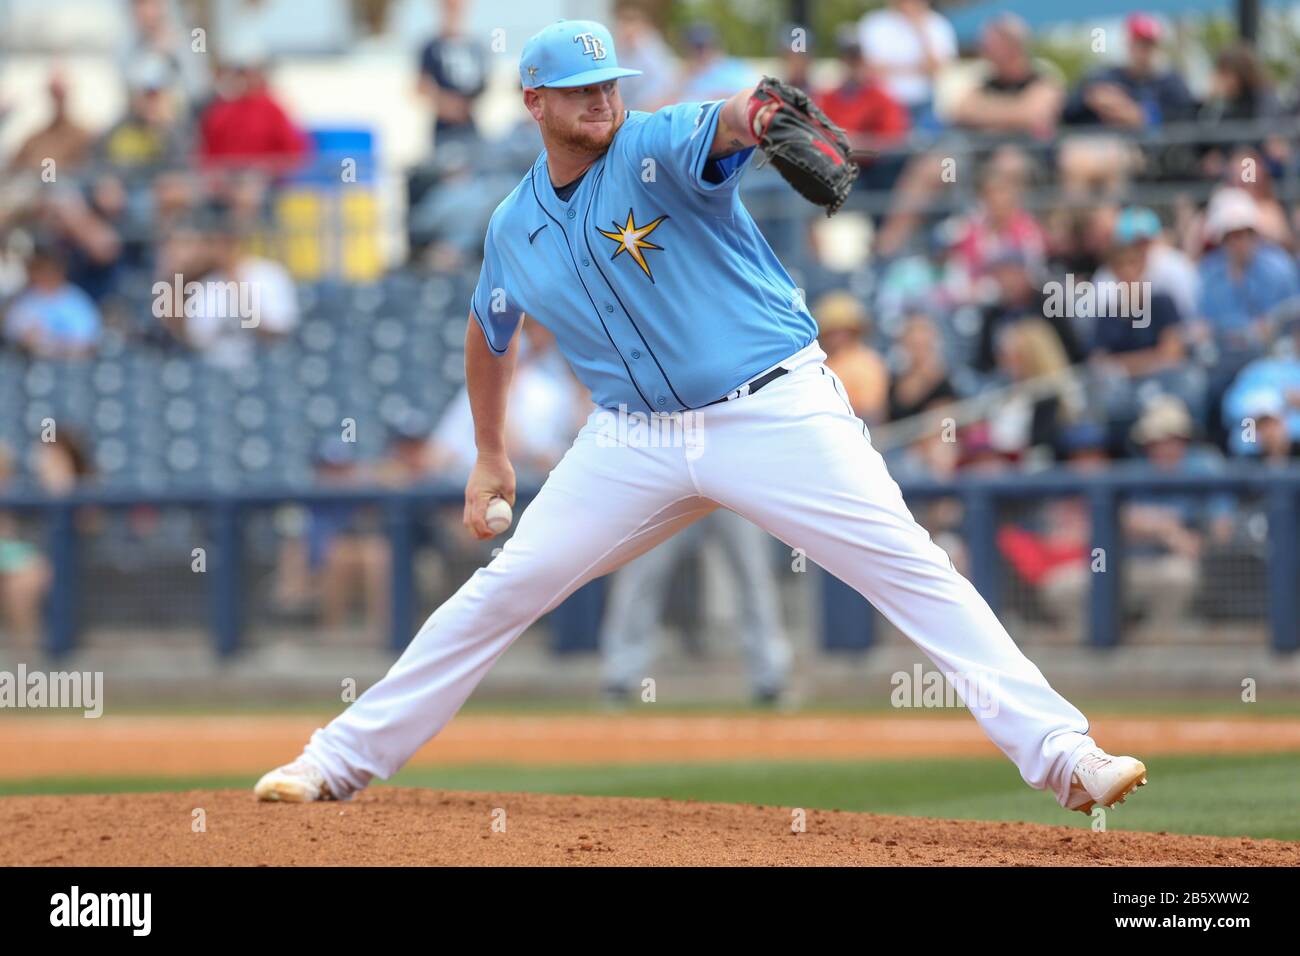 emmer Premisse Ver weg Tampa Bay Rays relief pitcher Brooks Pounders (86) delivers a pitch during  a spring training baseball game, Sunday, March 8, 2020, in Port Charlotte,  Florida, USA. (Photo by IOS/ESPA-Images Stock Photo - Alamy